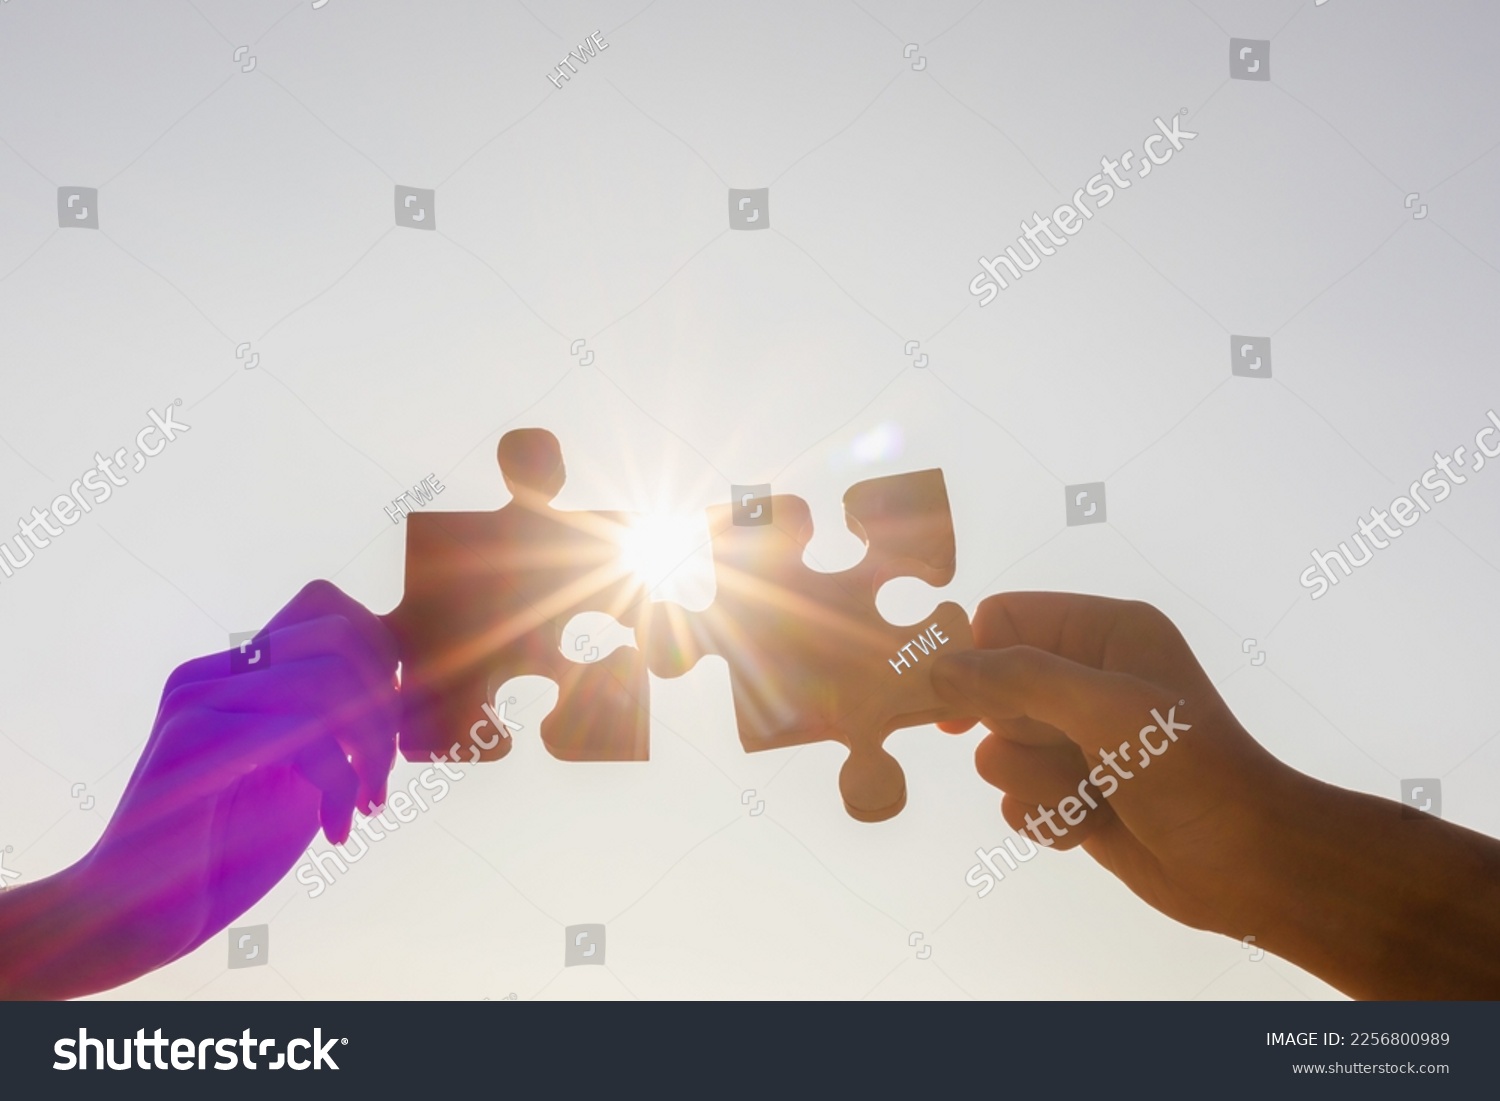 Cooperation Hands holding piece of blank jigsaw puzzle at sunset background #2256800989